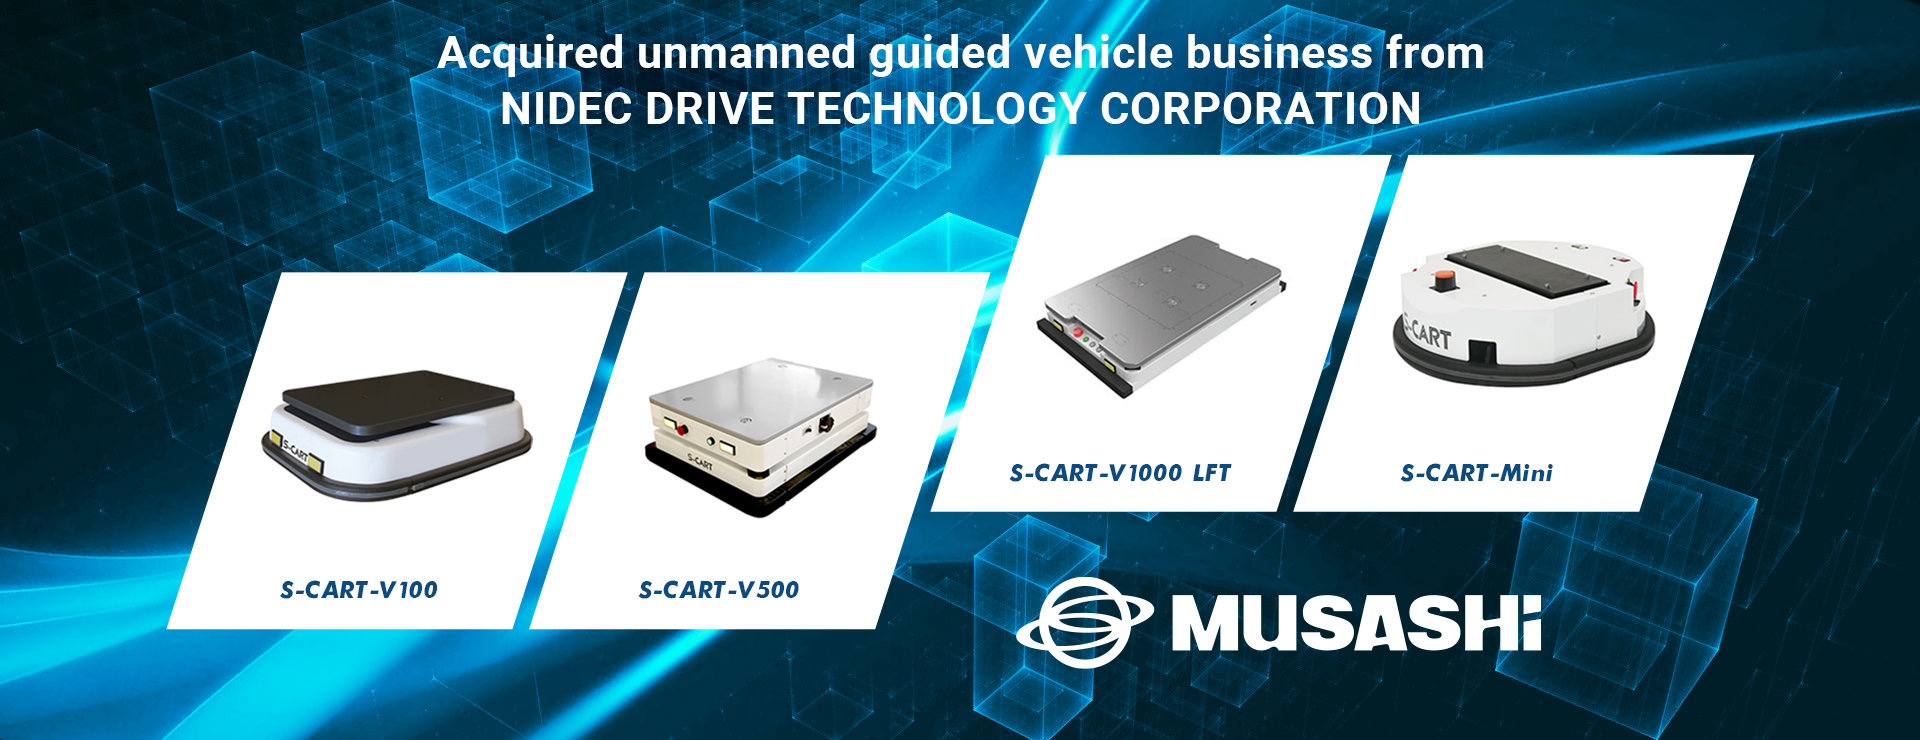 Acquired unmanned guided vehicle business from NIDEC DRIVE TECHNOLOGY CORPORATION.